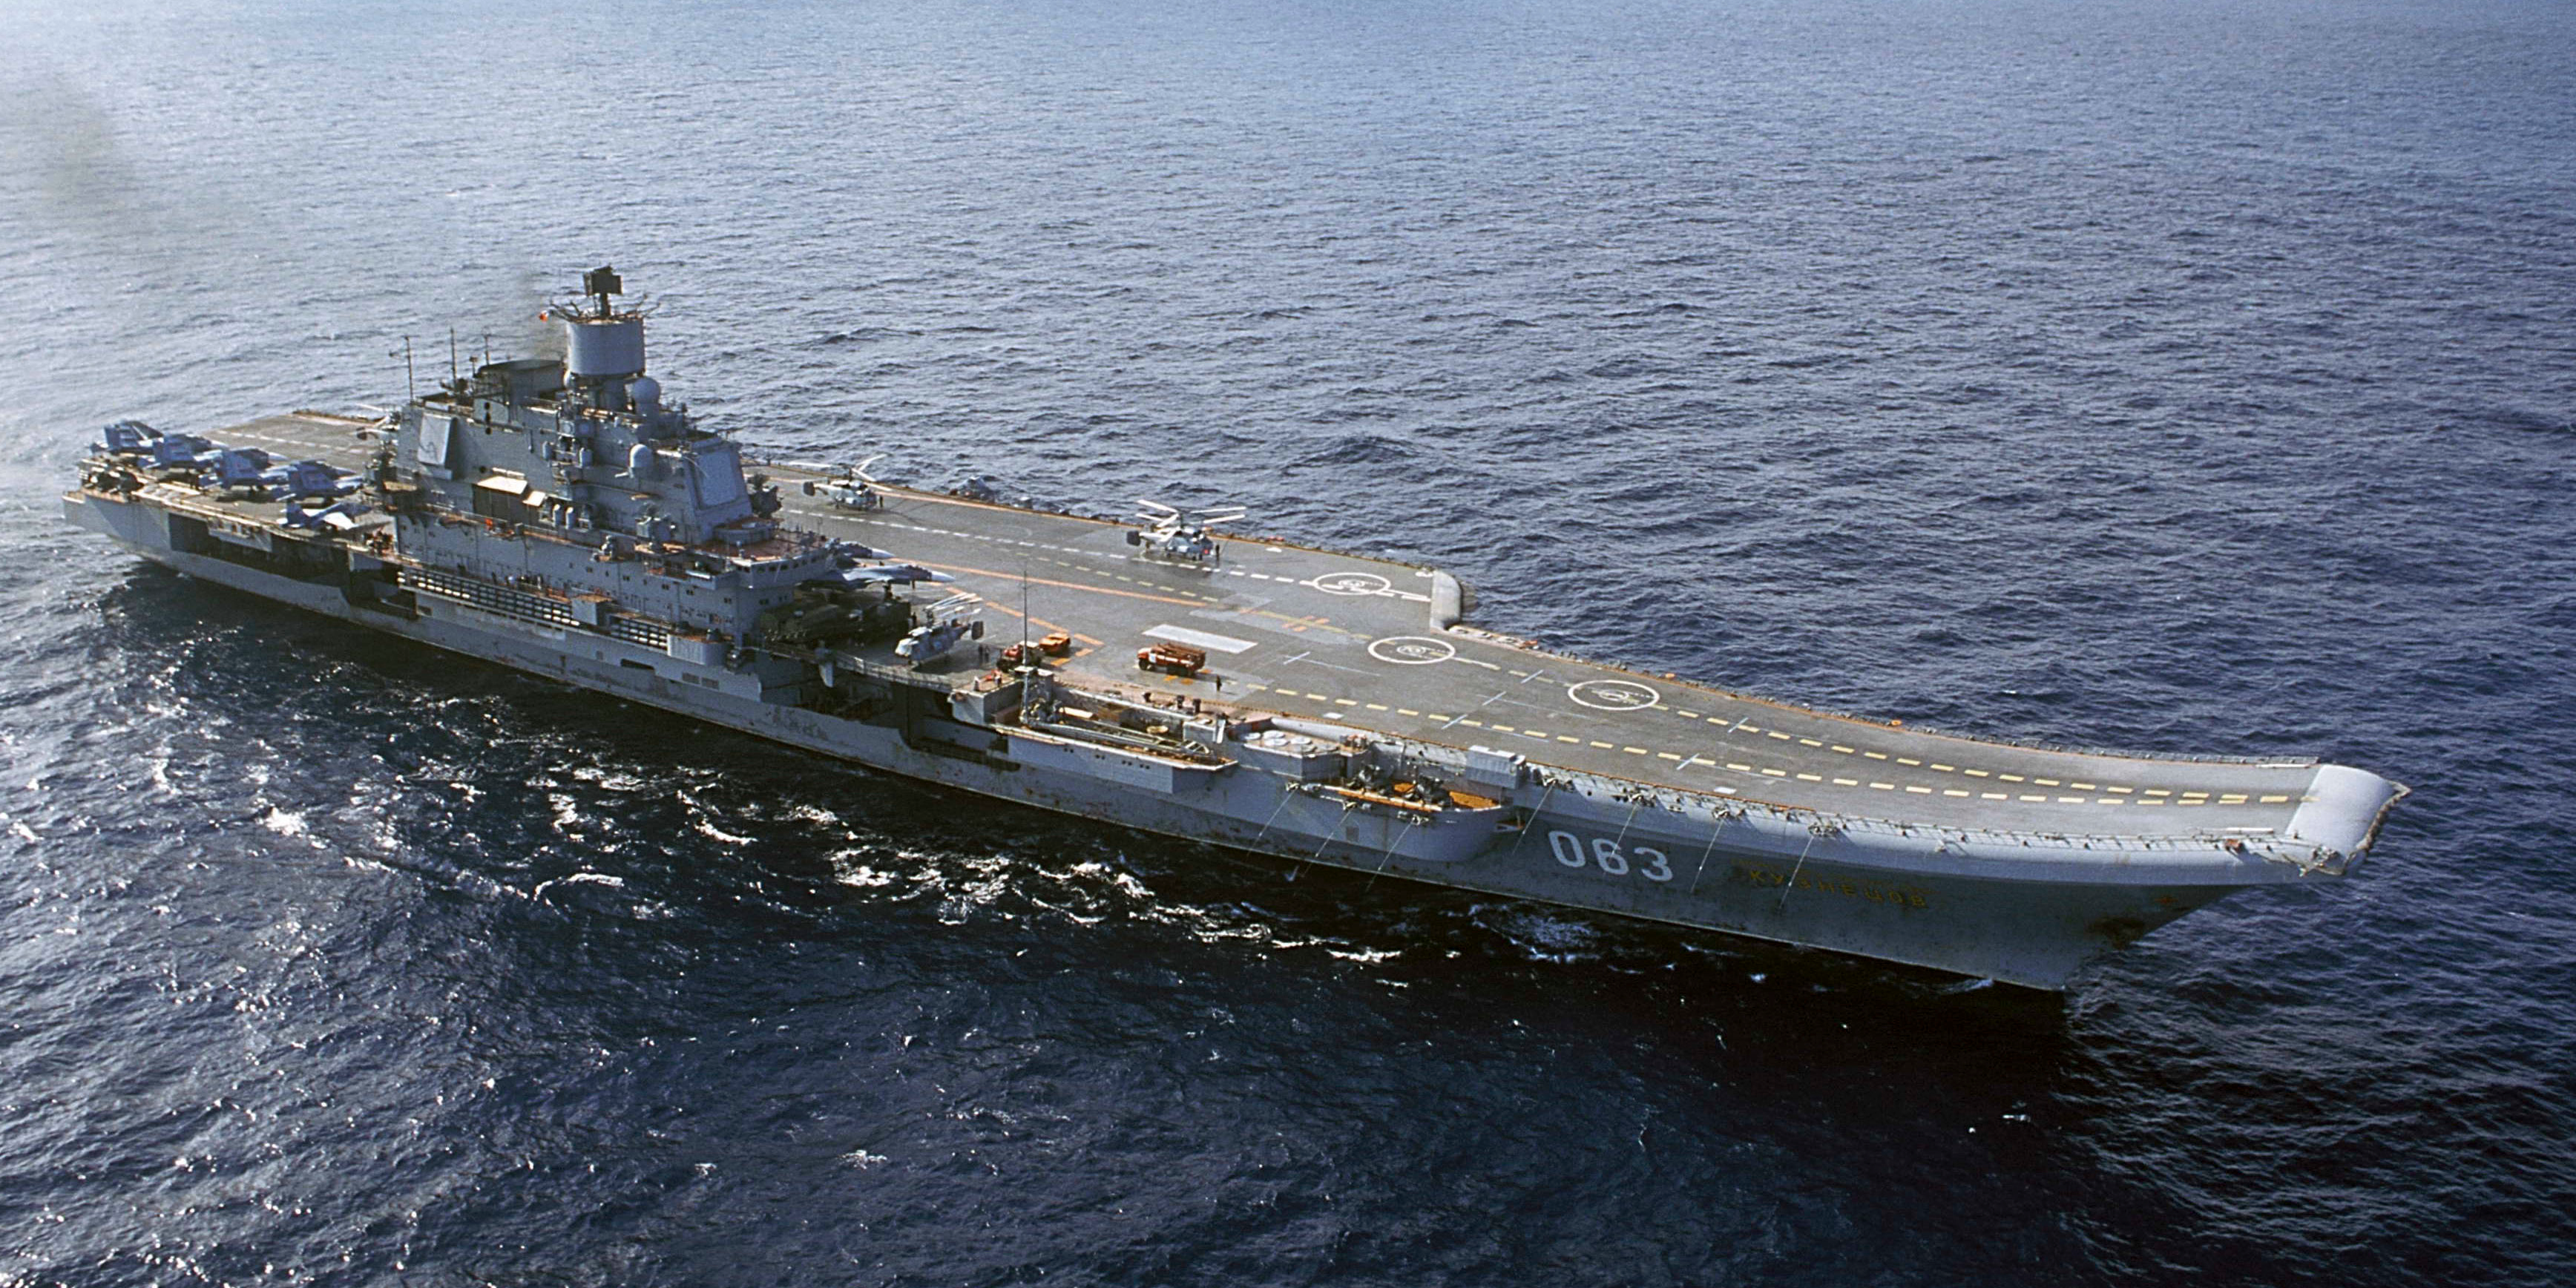 Russia's conventionally-powered Admiral Kuznetsov aircraft carrier